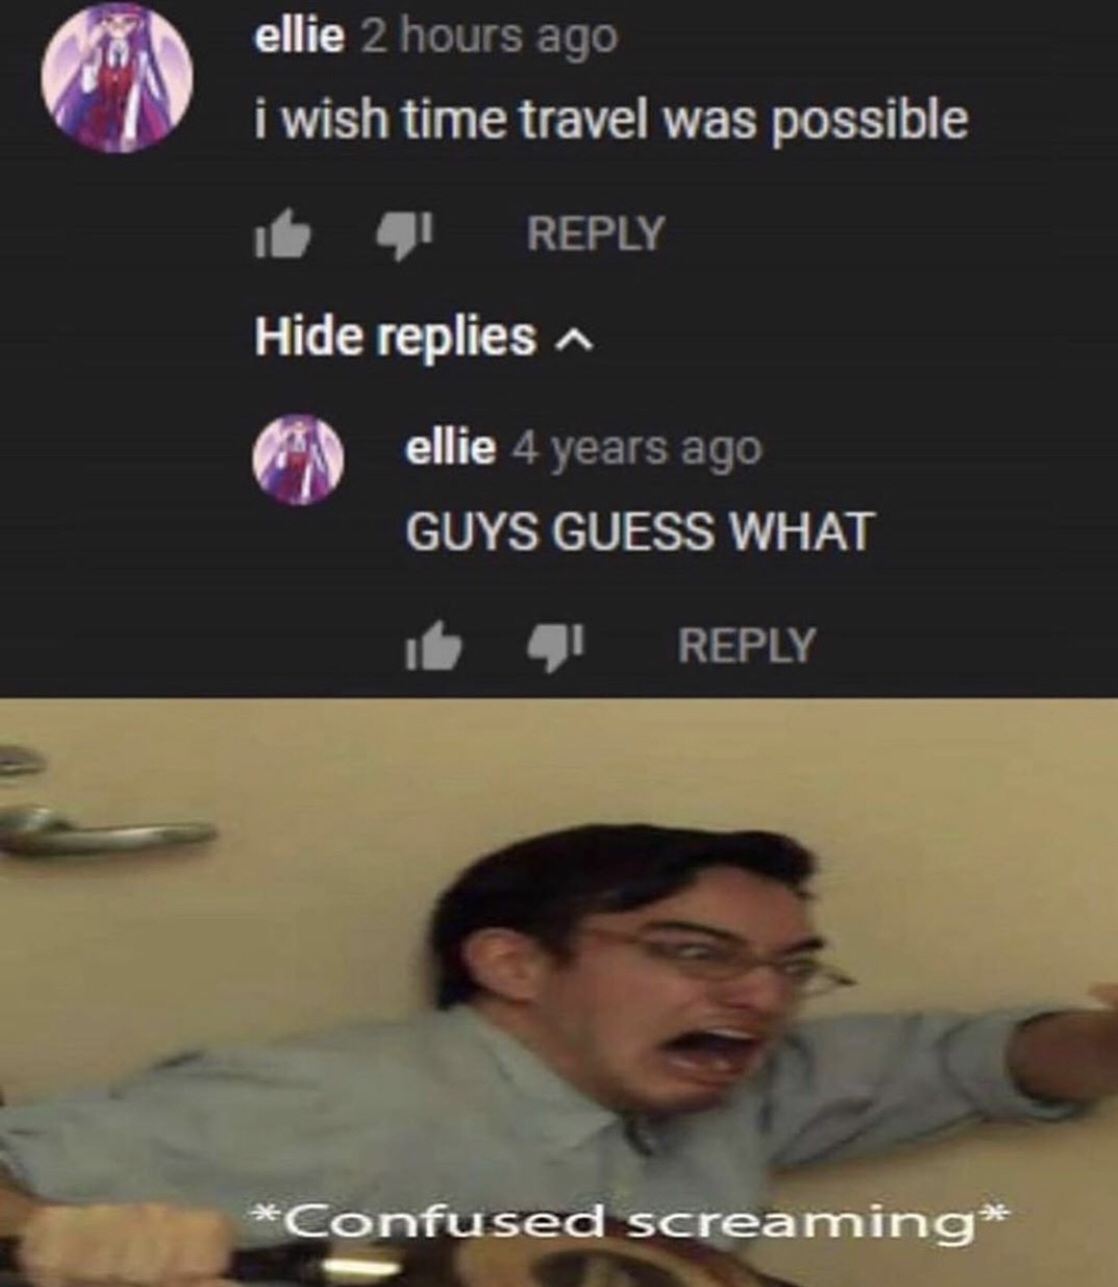 anime confused screaming meme - ellie 2 hours ago i wish time travel was possible it 4 Hide replies 6 ellie 4 years ago Guys Guess What it 4 Confused screaming